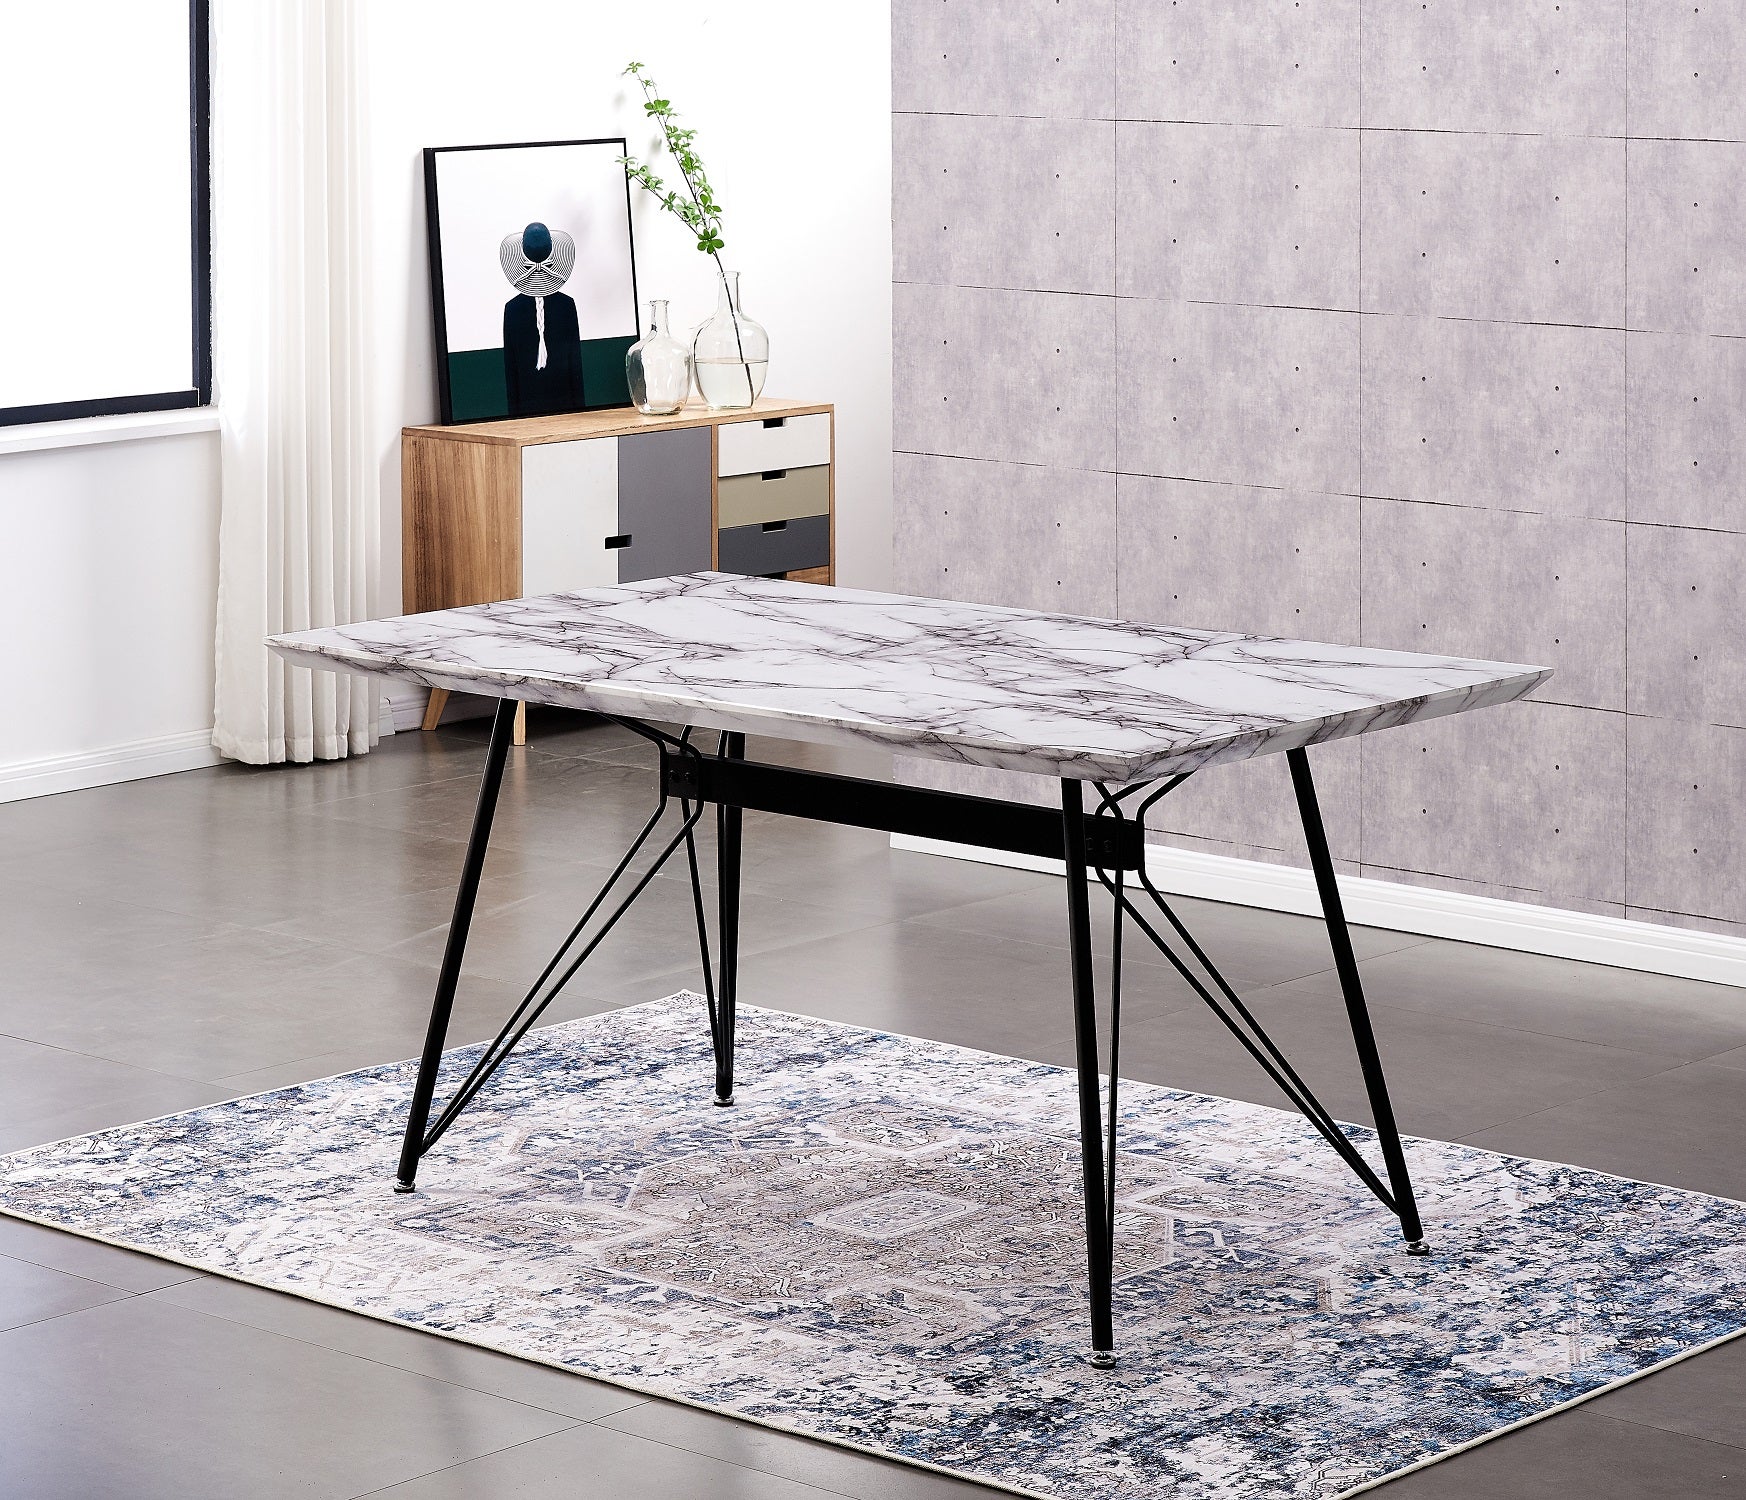 AINPECCA 1x 150x90cm Rectangular Dining Table Faux Marble Grey Look Black Metal Legs For Home Office Commercial Place